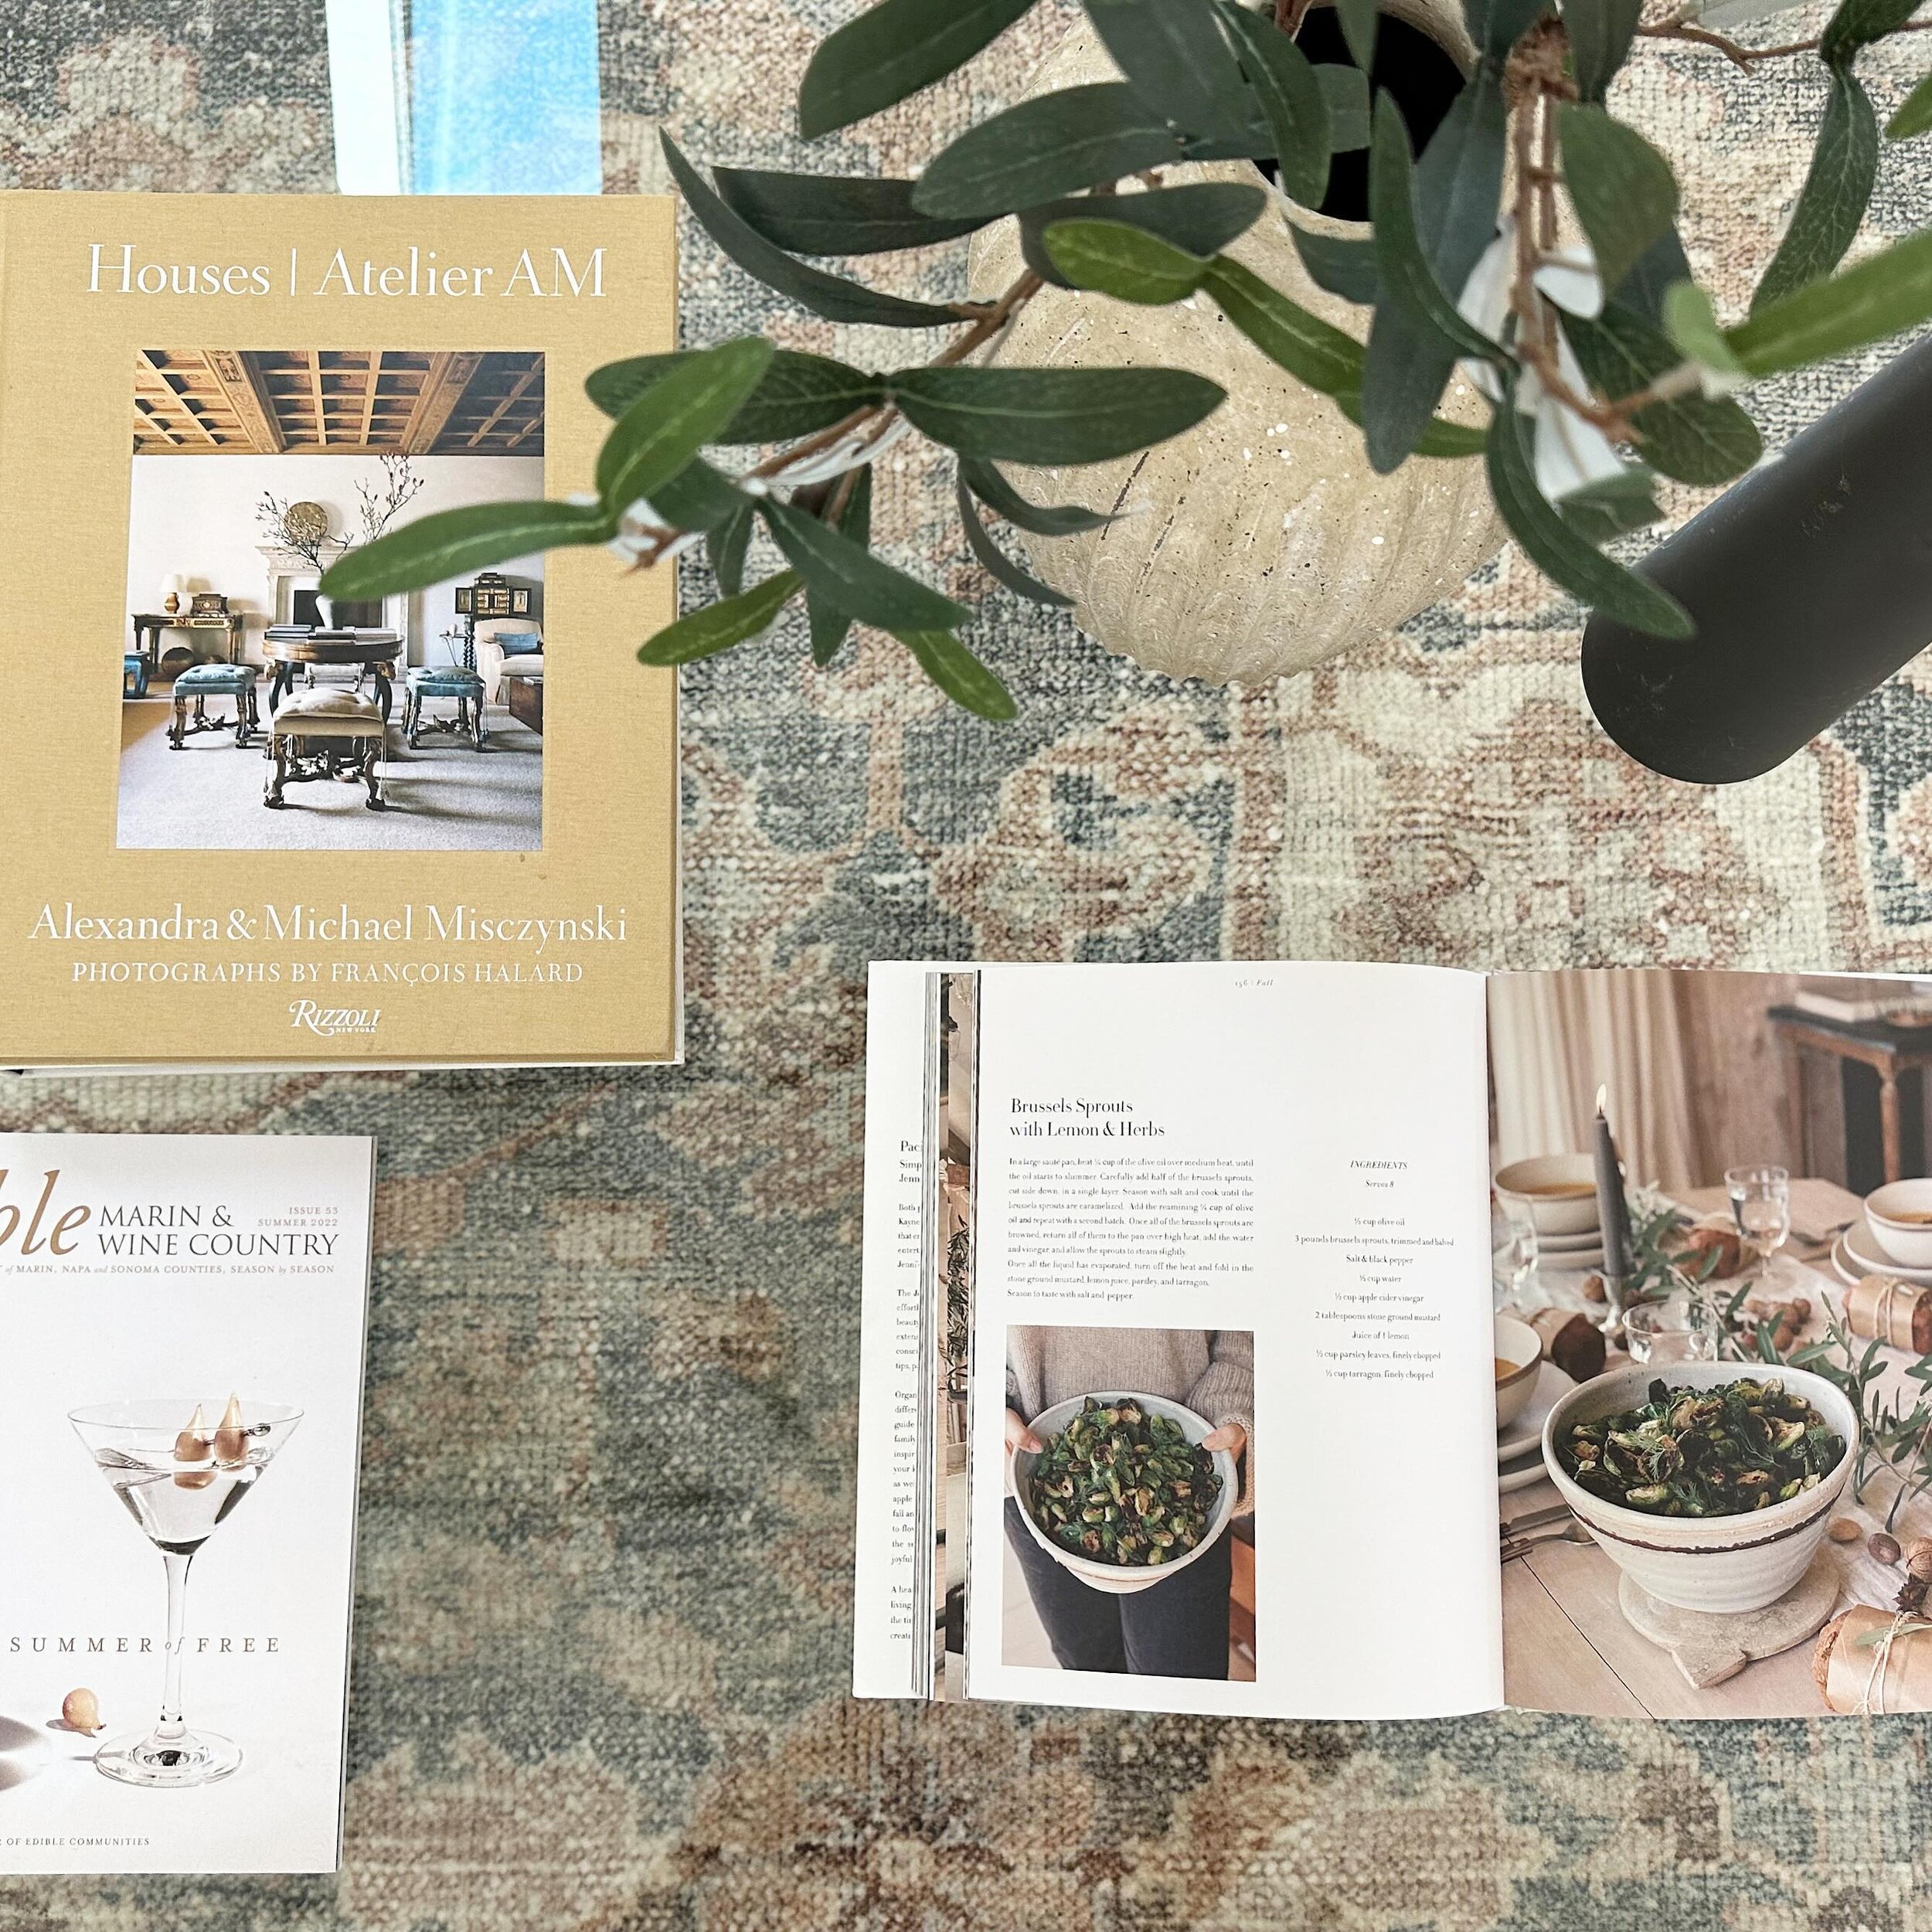 .
One of our favorite things&hellip;coffee table books! Not only are coffee table books eye-catching, they are wonderful conversation starters!📚

📷: @eskosf 

#stagingbymodesign #fulfilled
#succeed #inspireothers #book
#home #homestaging #homedecor